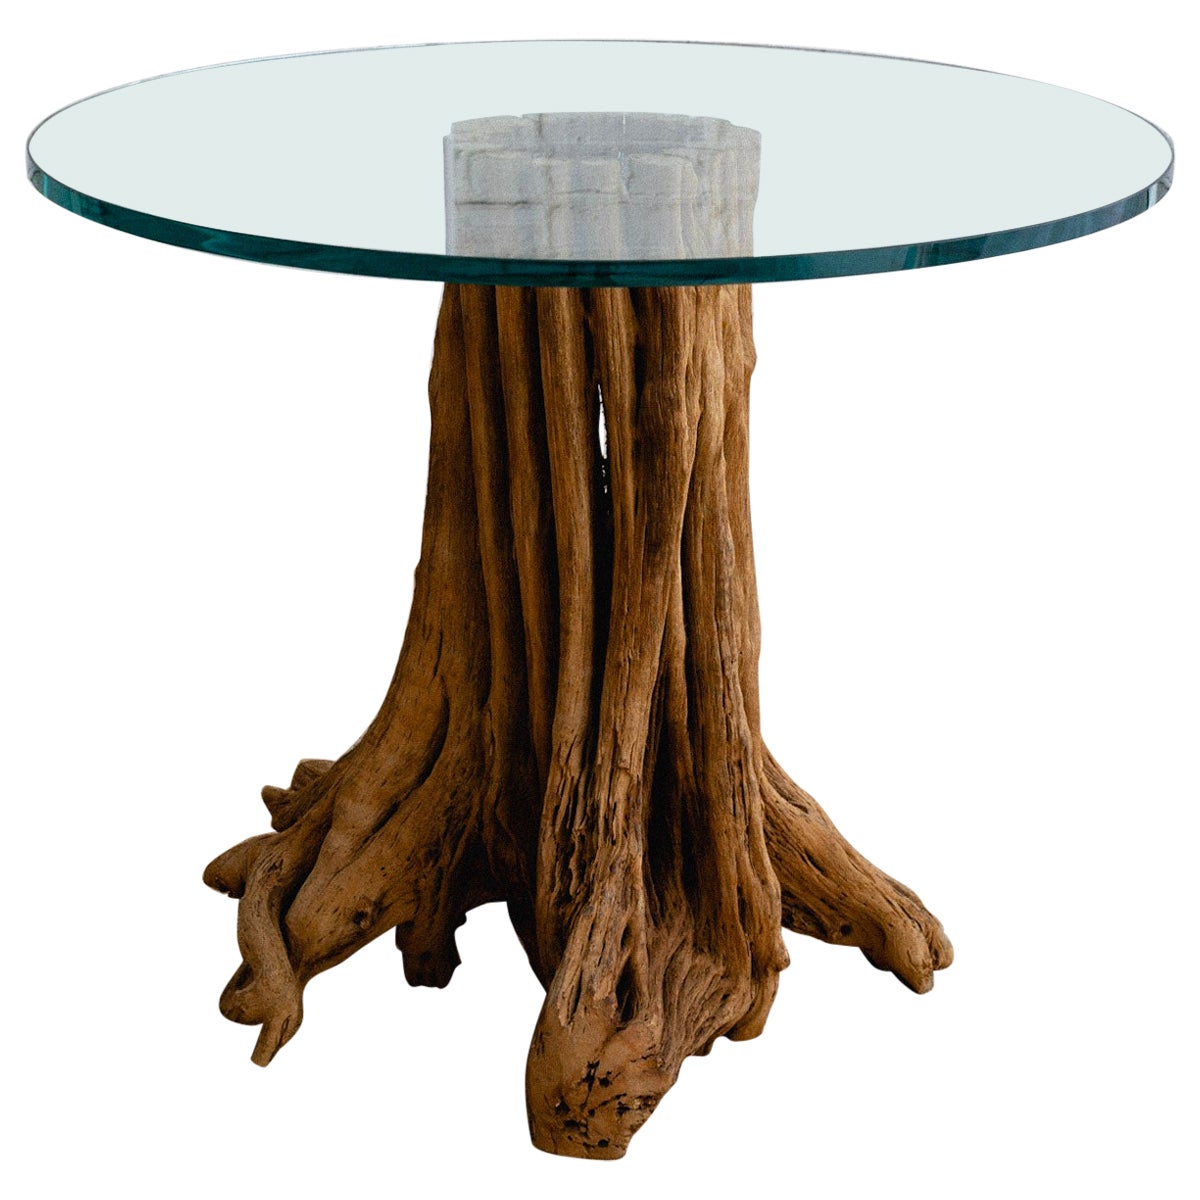 Saguaro Cactus Dining Table With Glass Top For Sale